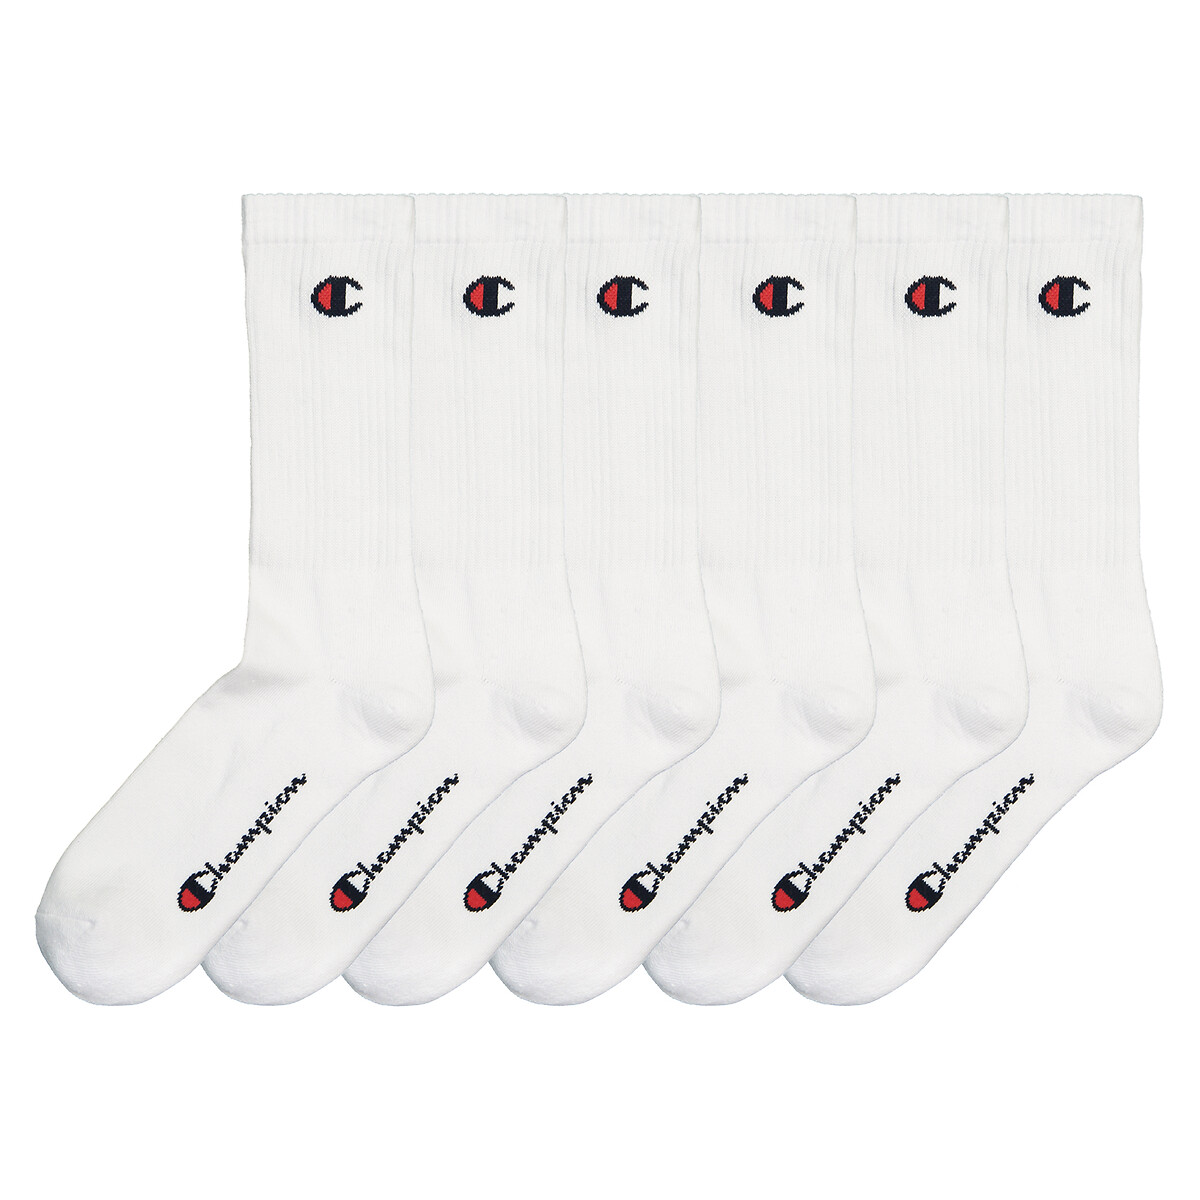 Pack of 6 Pairs of Crew Socks in Cotton Mix with Logo